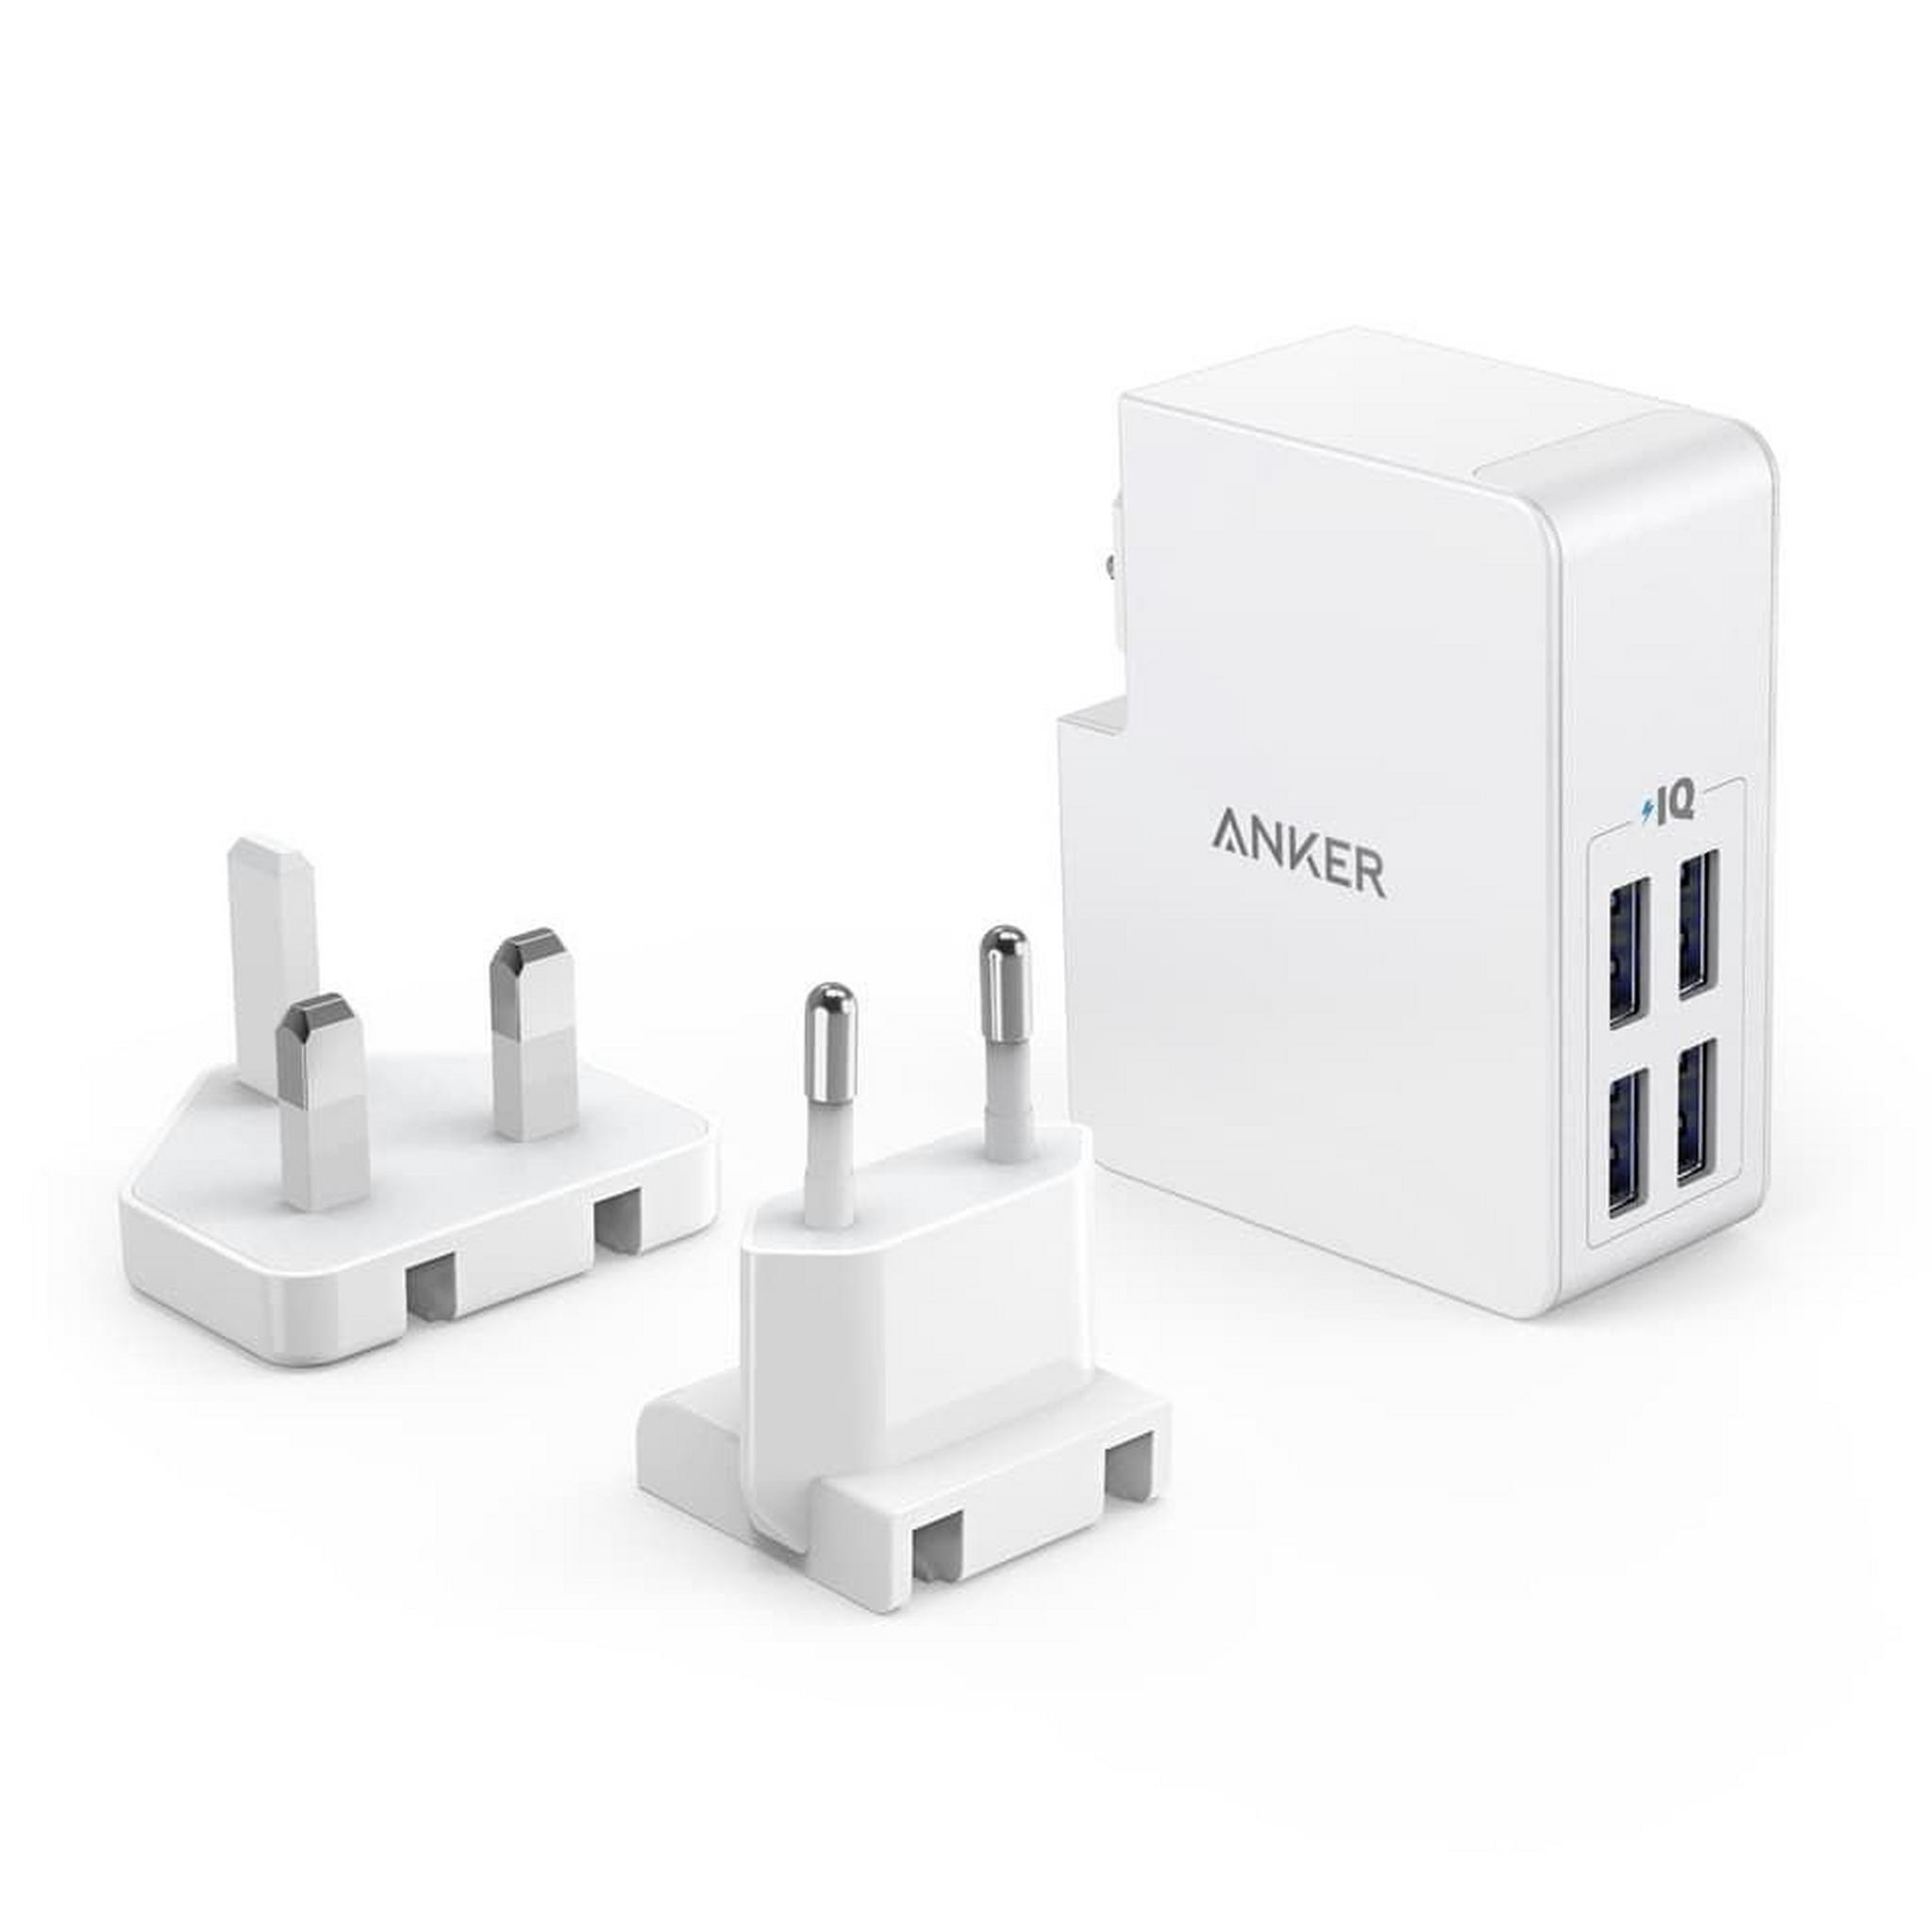 Anker PowerPort 4 Ports Wall Charger - White